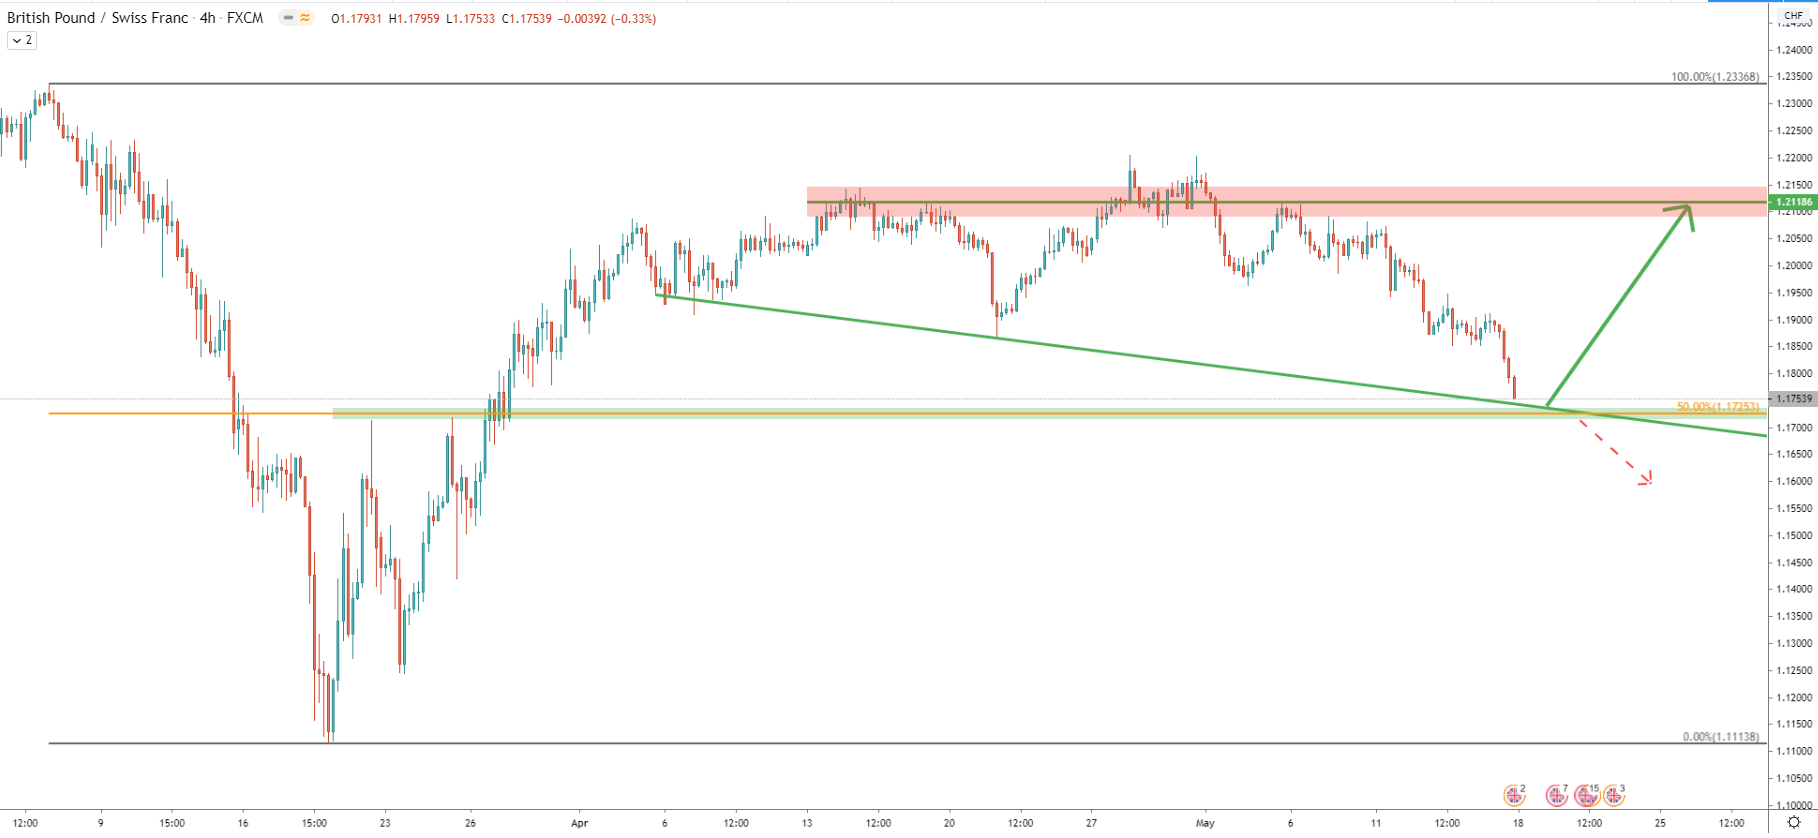 GBP/CHF 4-Hour Technical Analysis 15 May 2020